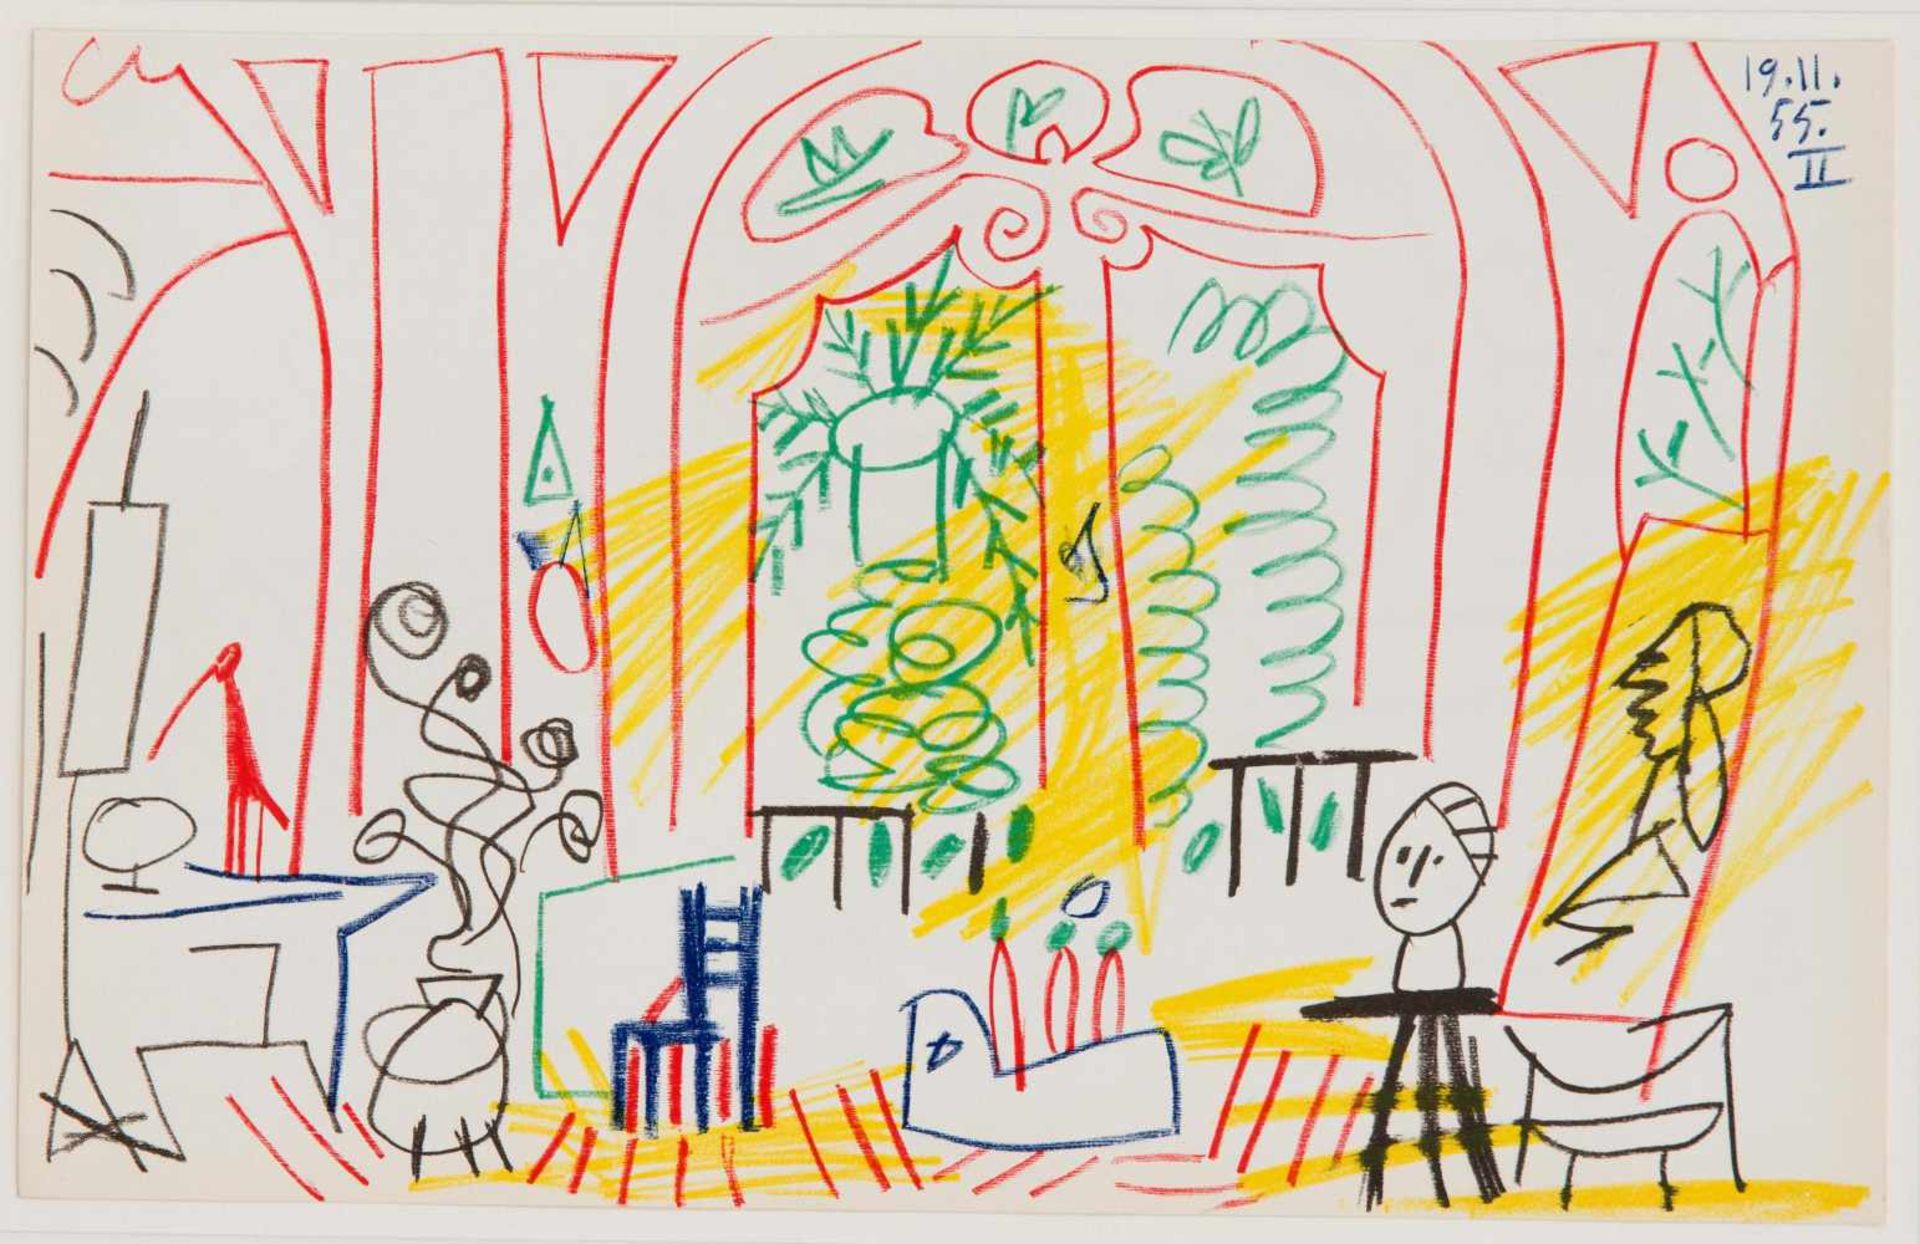 Pablo Picasso (1881-1973), ''Californie, Atelier II'', color lithograph, 1955, top rightdated 19.